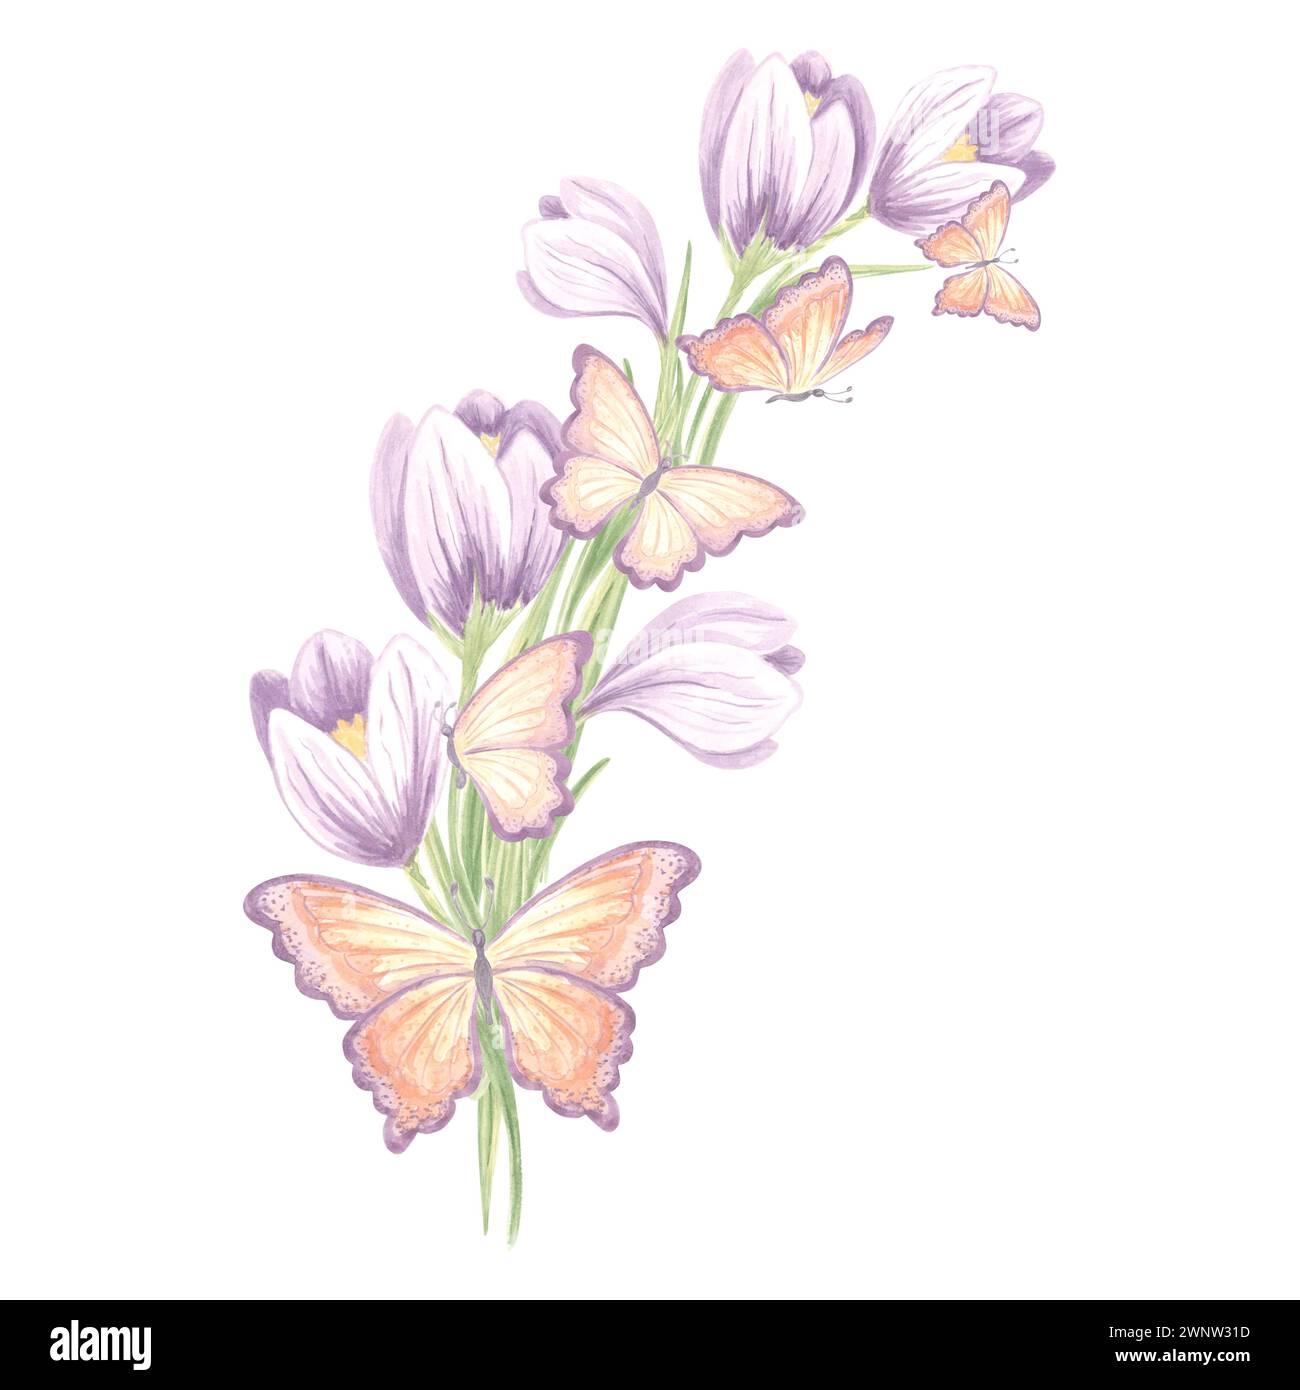 Bouquet of purple crocuses flowers with butterflies. Isolated hand drawn watercolor illustration spring saffron blossom. Floral drawing template for c Stock Photo